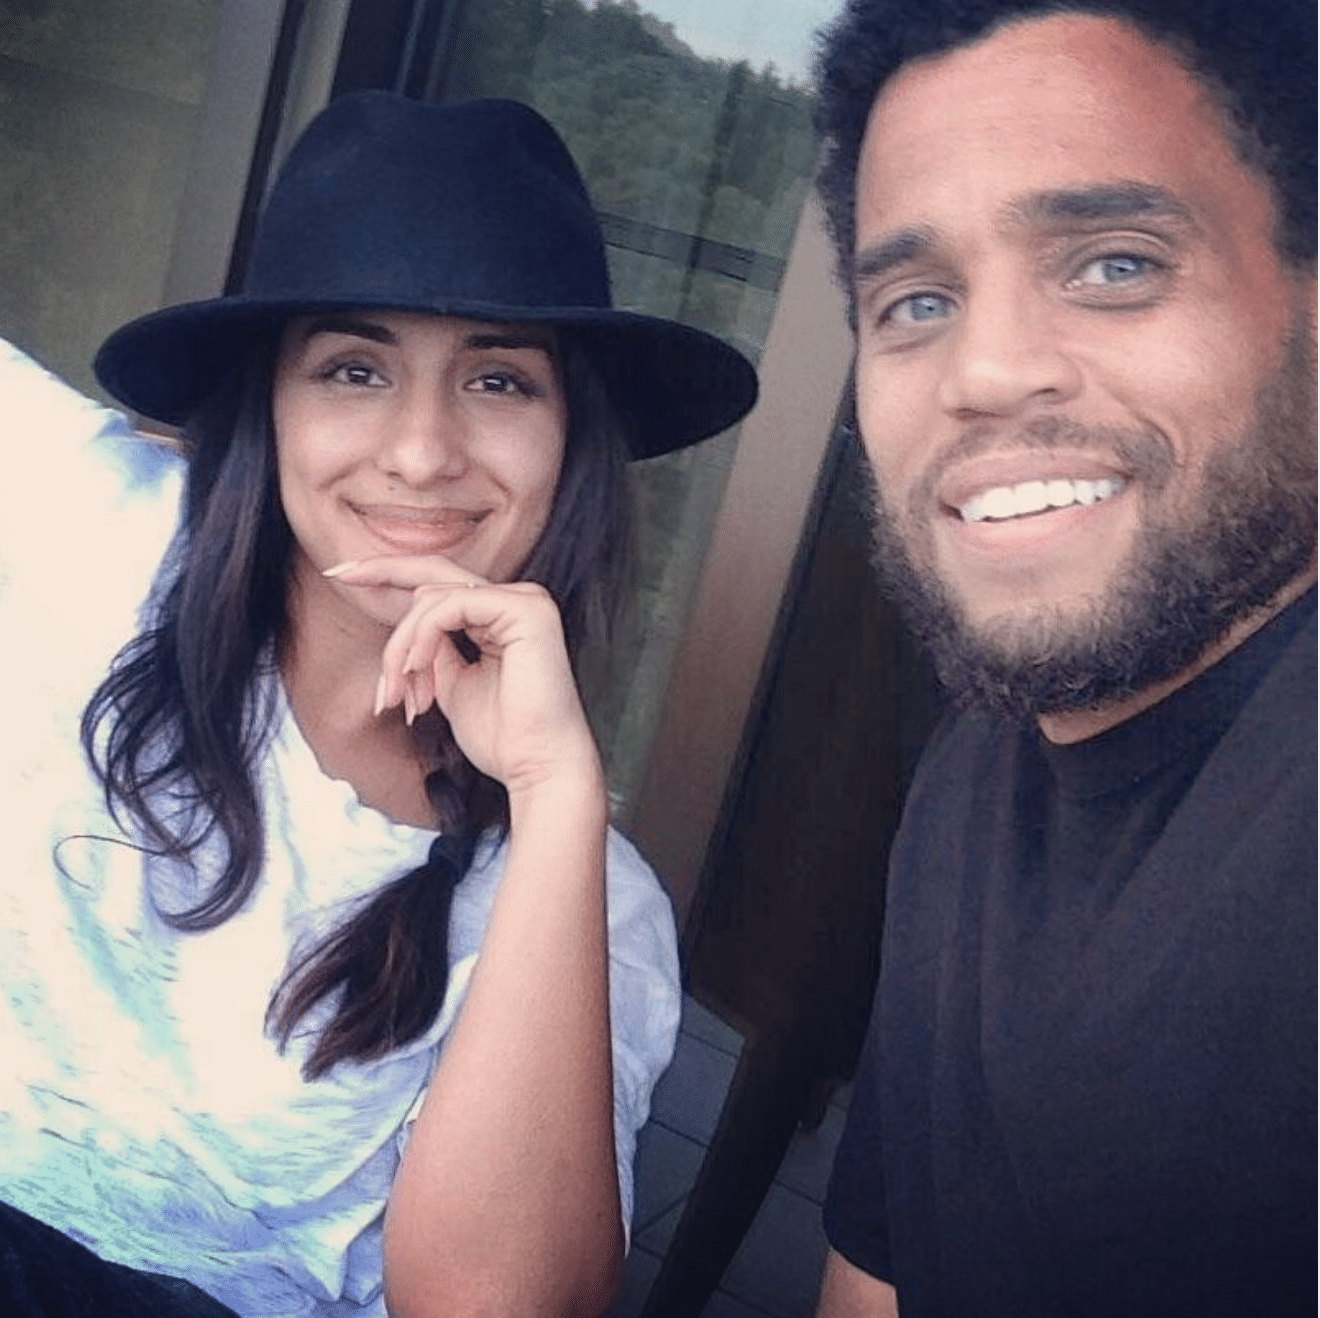 This Is How Michael Ealy’s Wife Breaks The Ice During His Sex Scenes